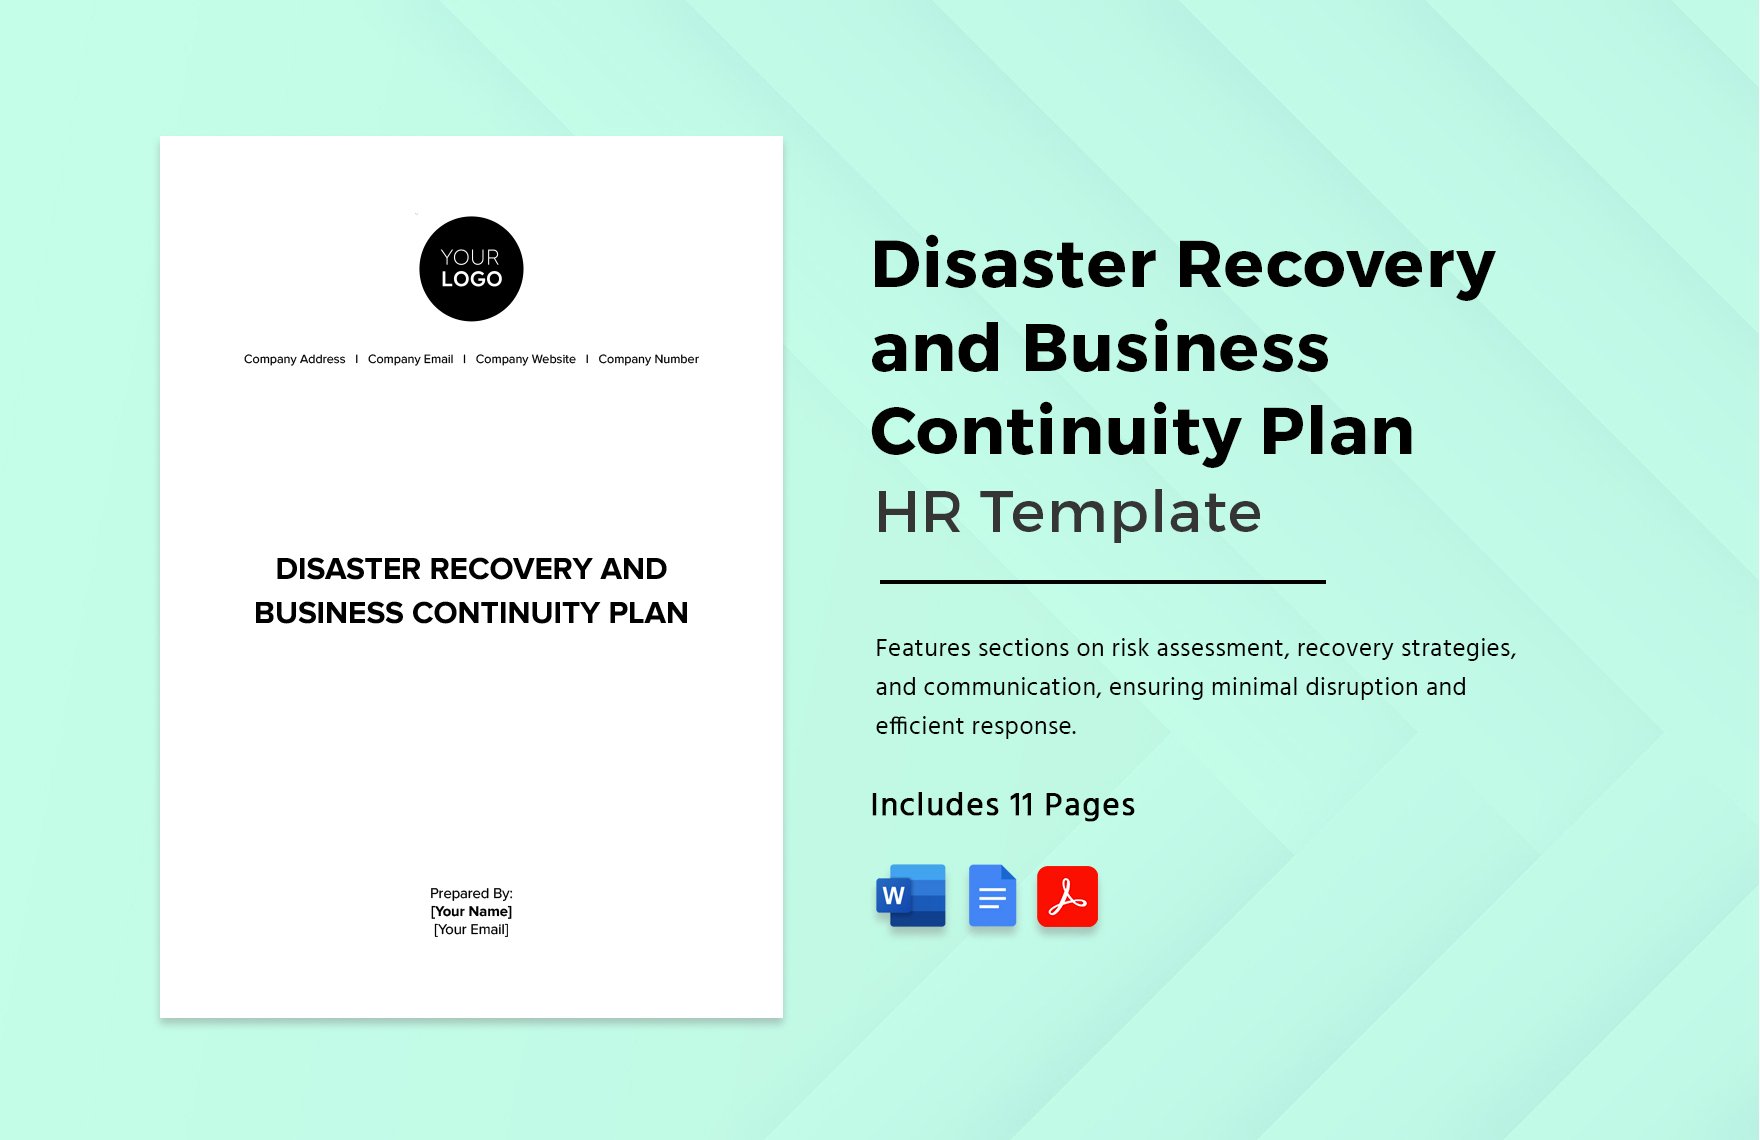 Disaster Recovery and Business Continuity Plan HR Template